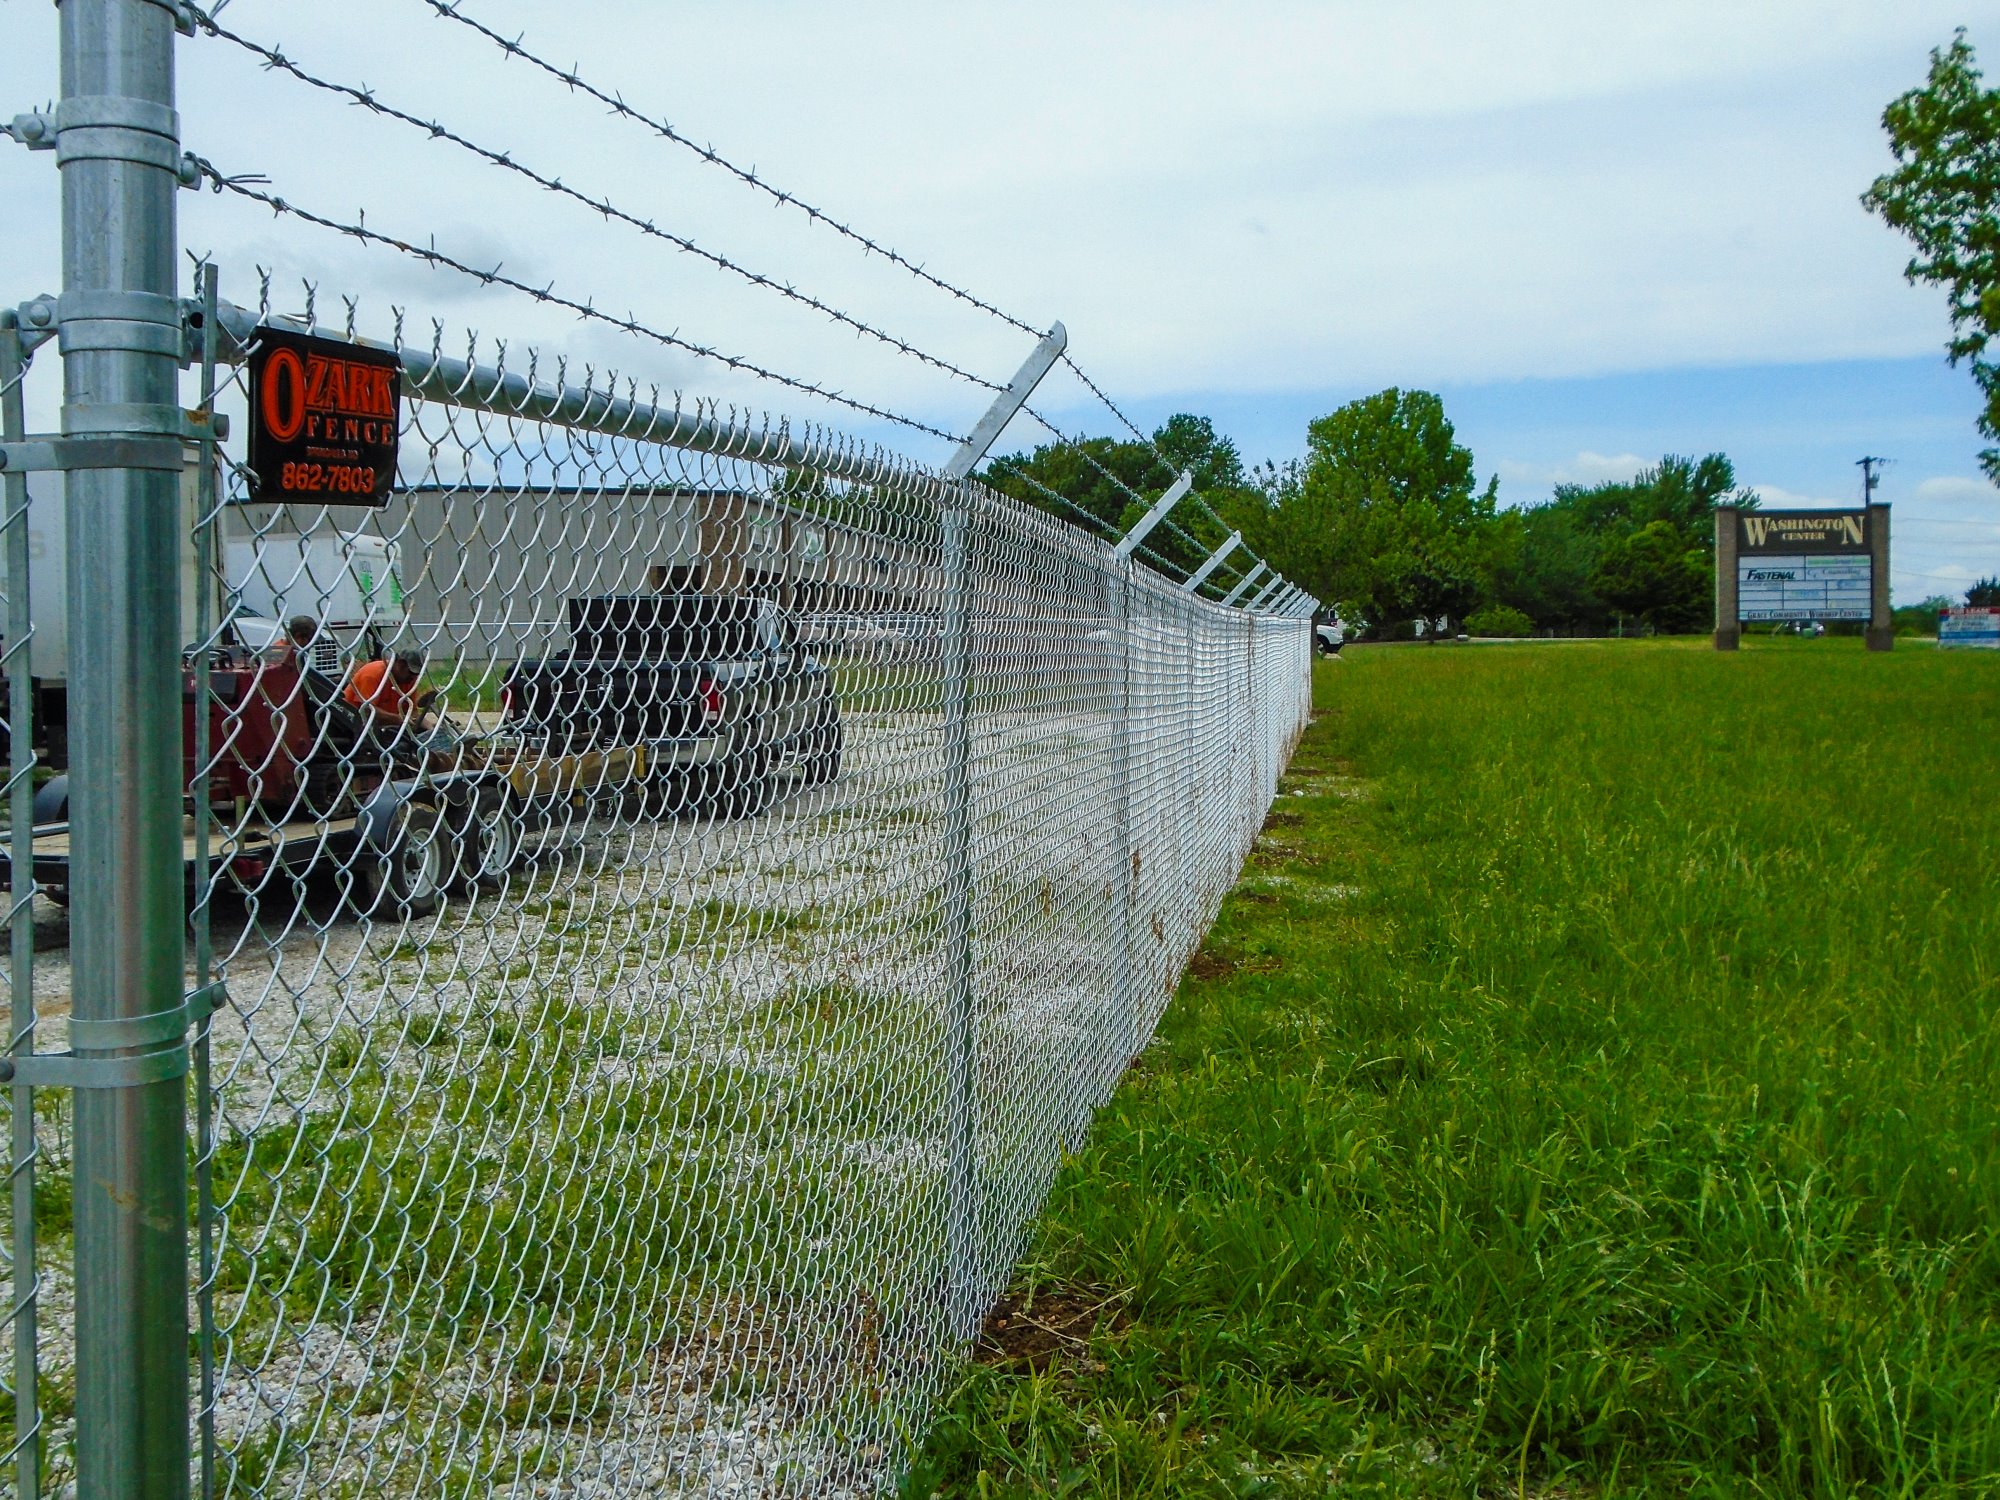 Hurley Missouri commercial fencing company